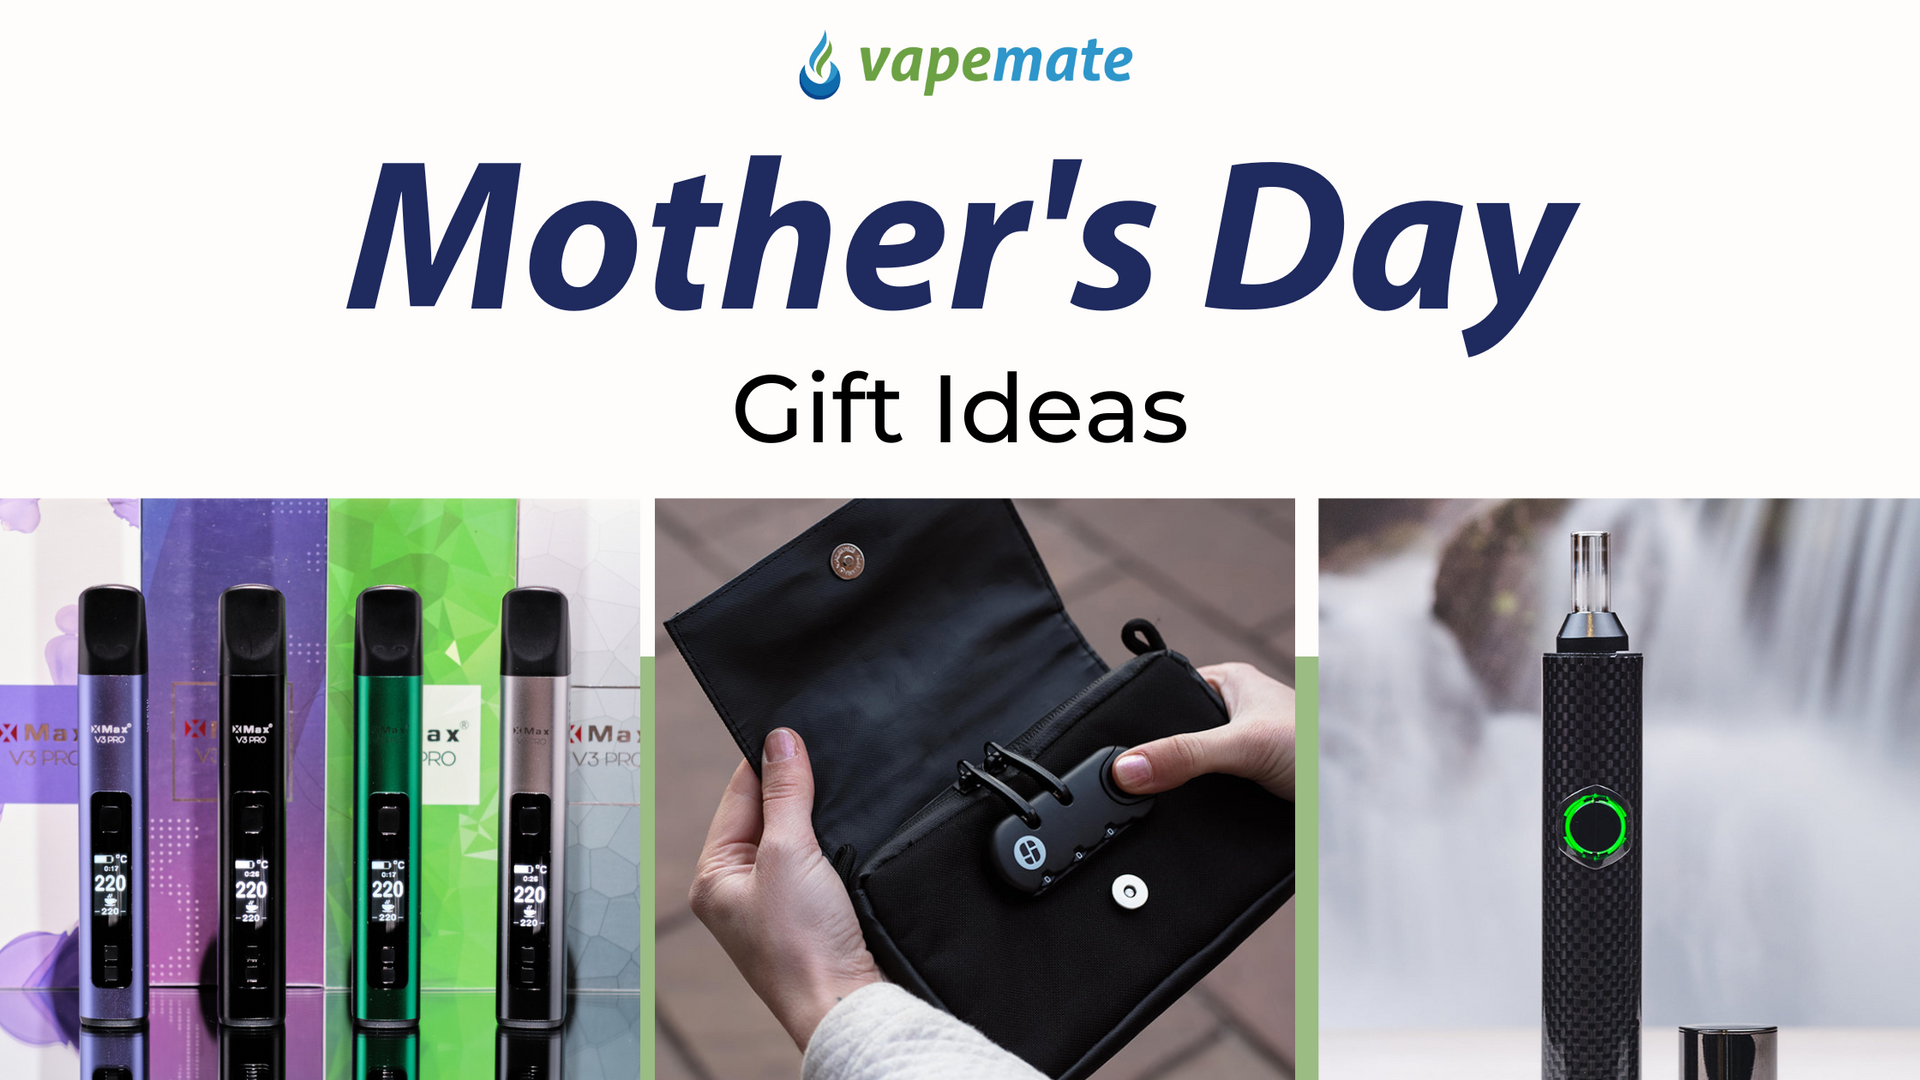 Mother's Day Gift Guide: Top 3 Picks for the Ultimate Vaping Experience & Storage Solutions